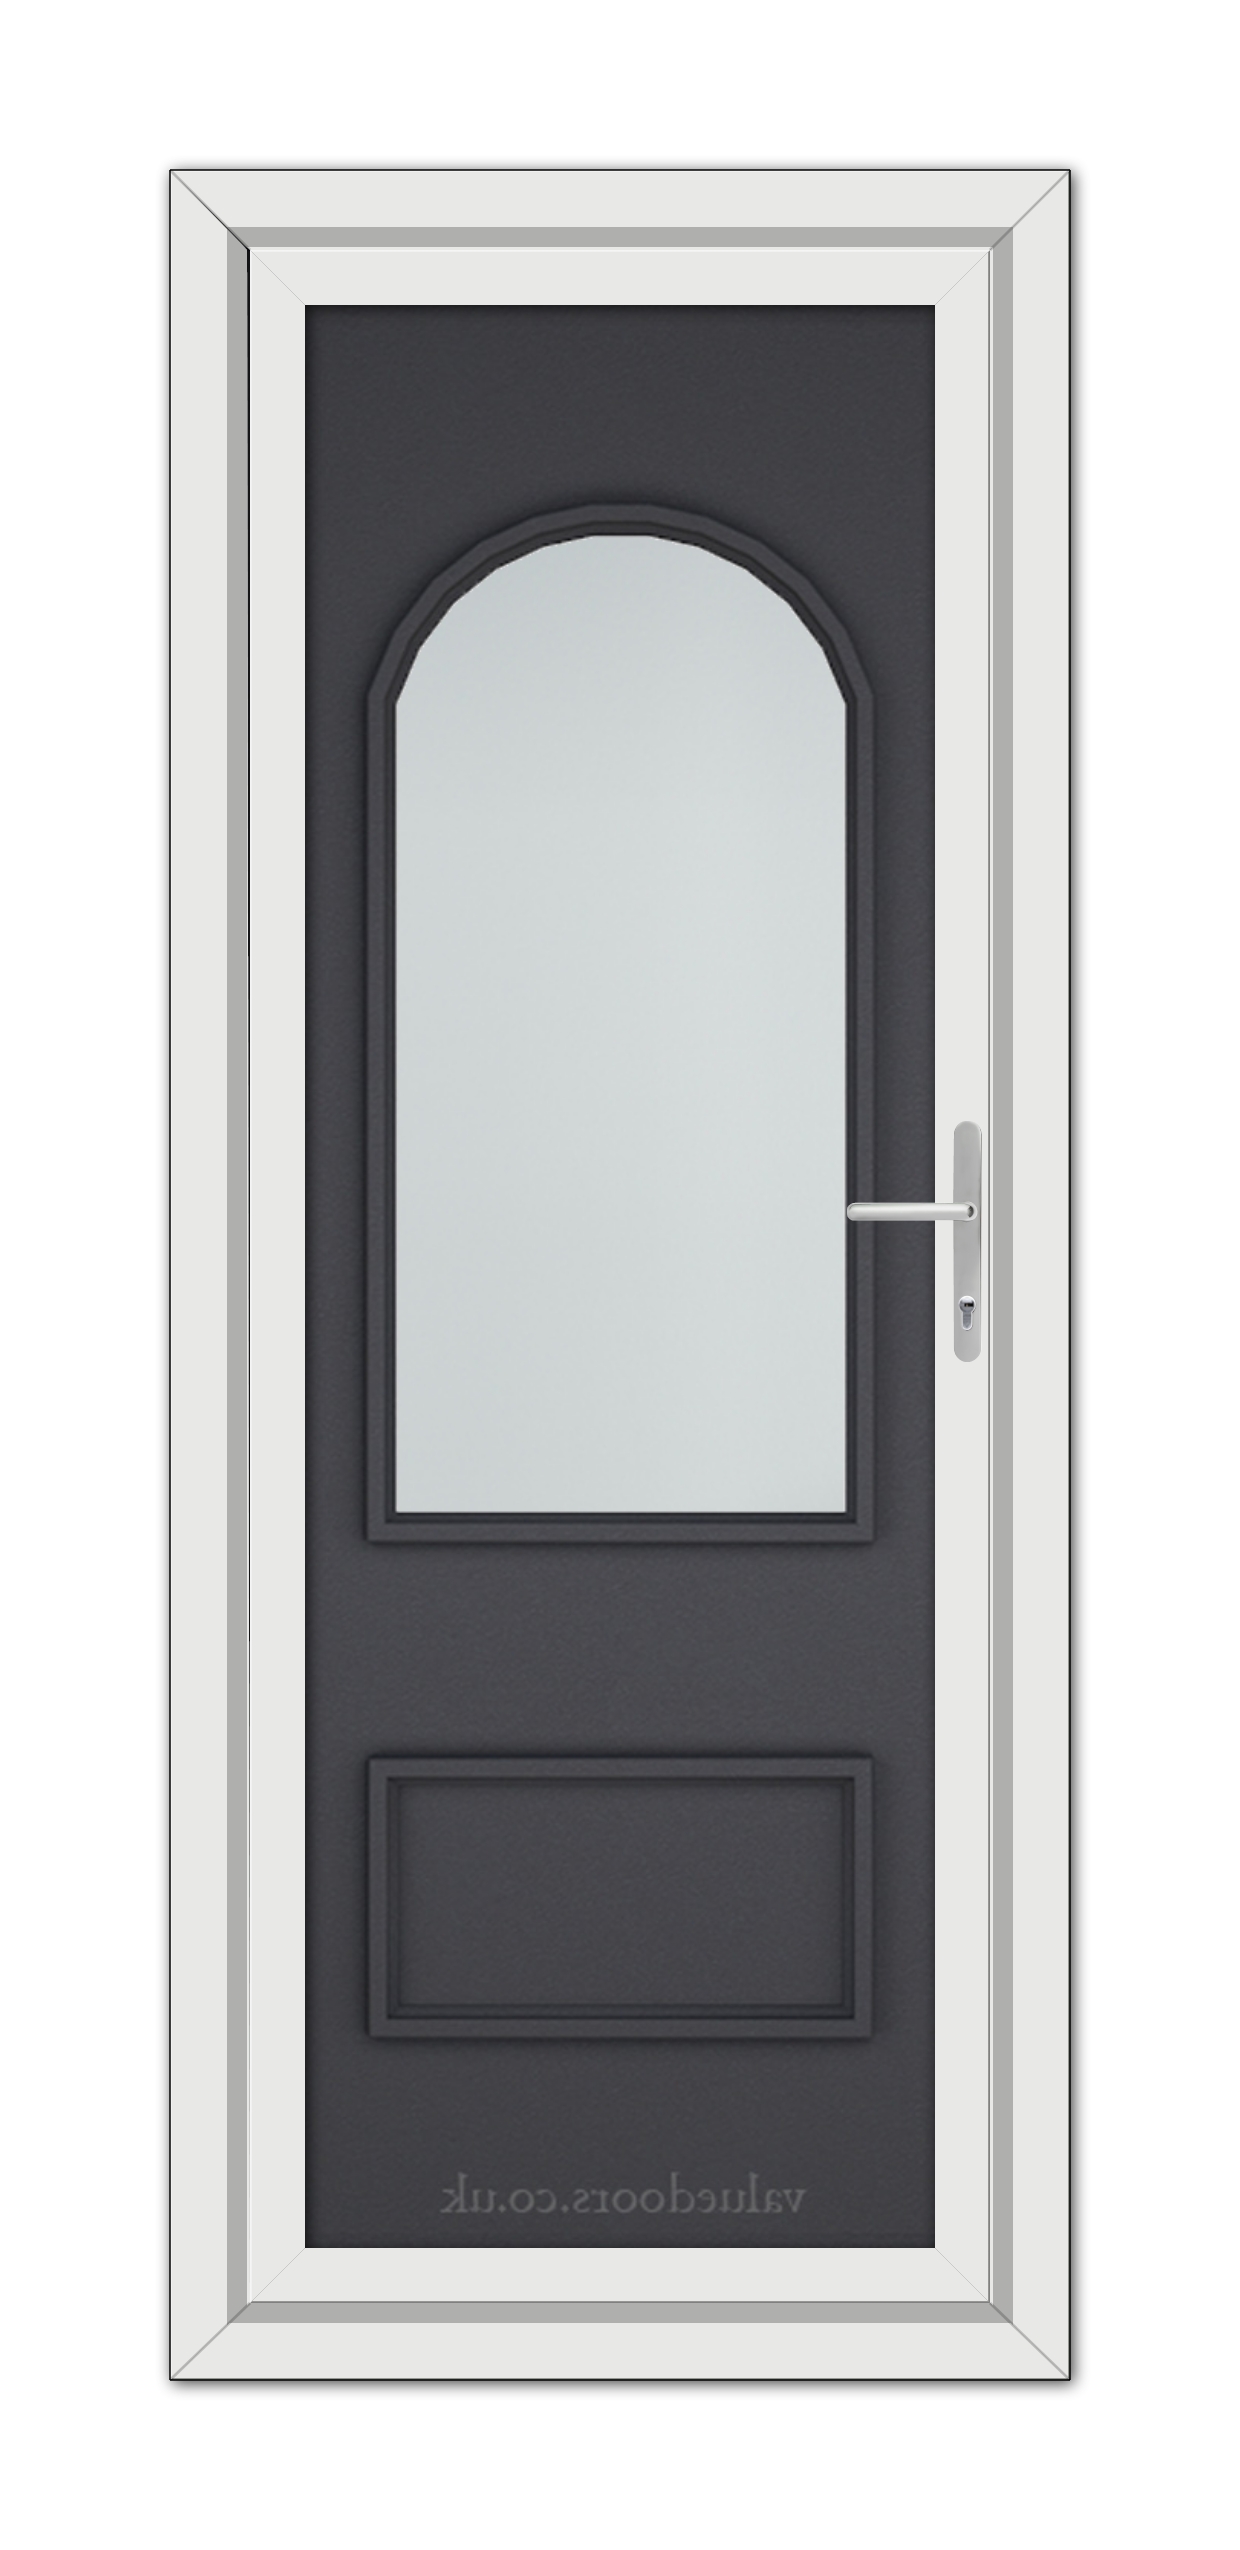 A modern Grey Grained Rockingham uPVC door with an arched window and silver handle, framed in white.